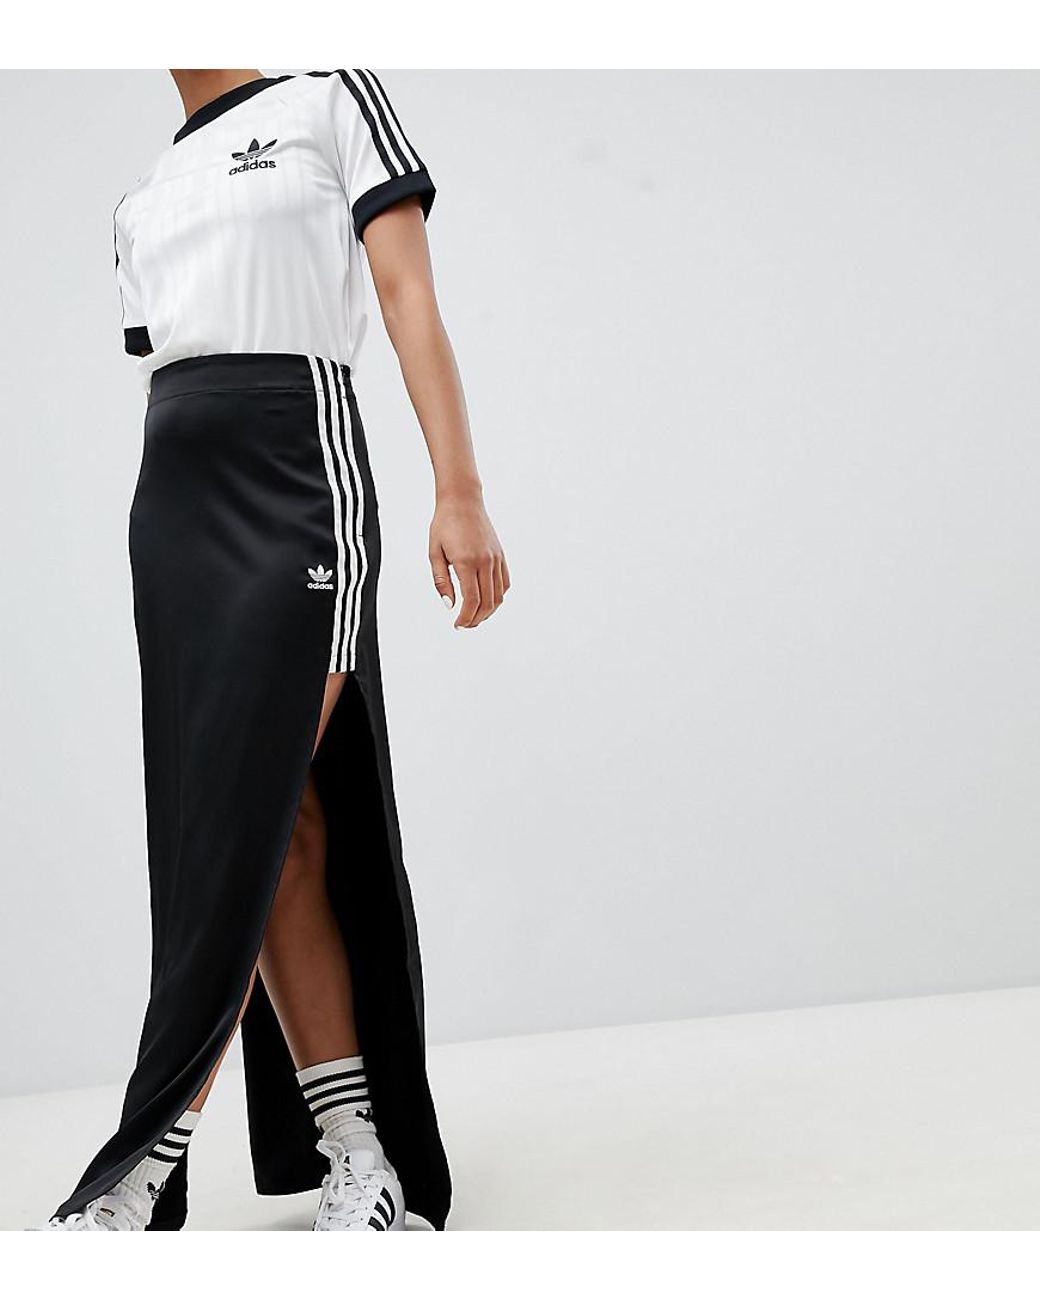 adidas Originals Fashion League Maxi Skirt With Extreme Slit in Black | Lyst